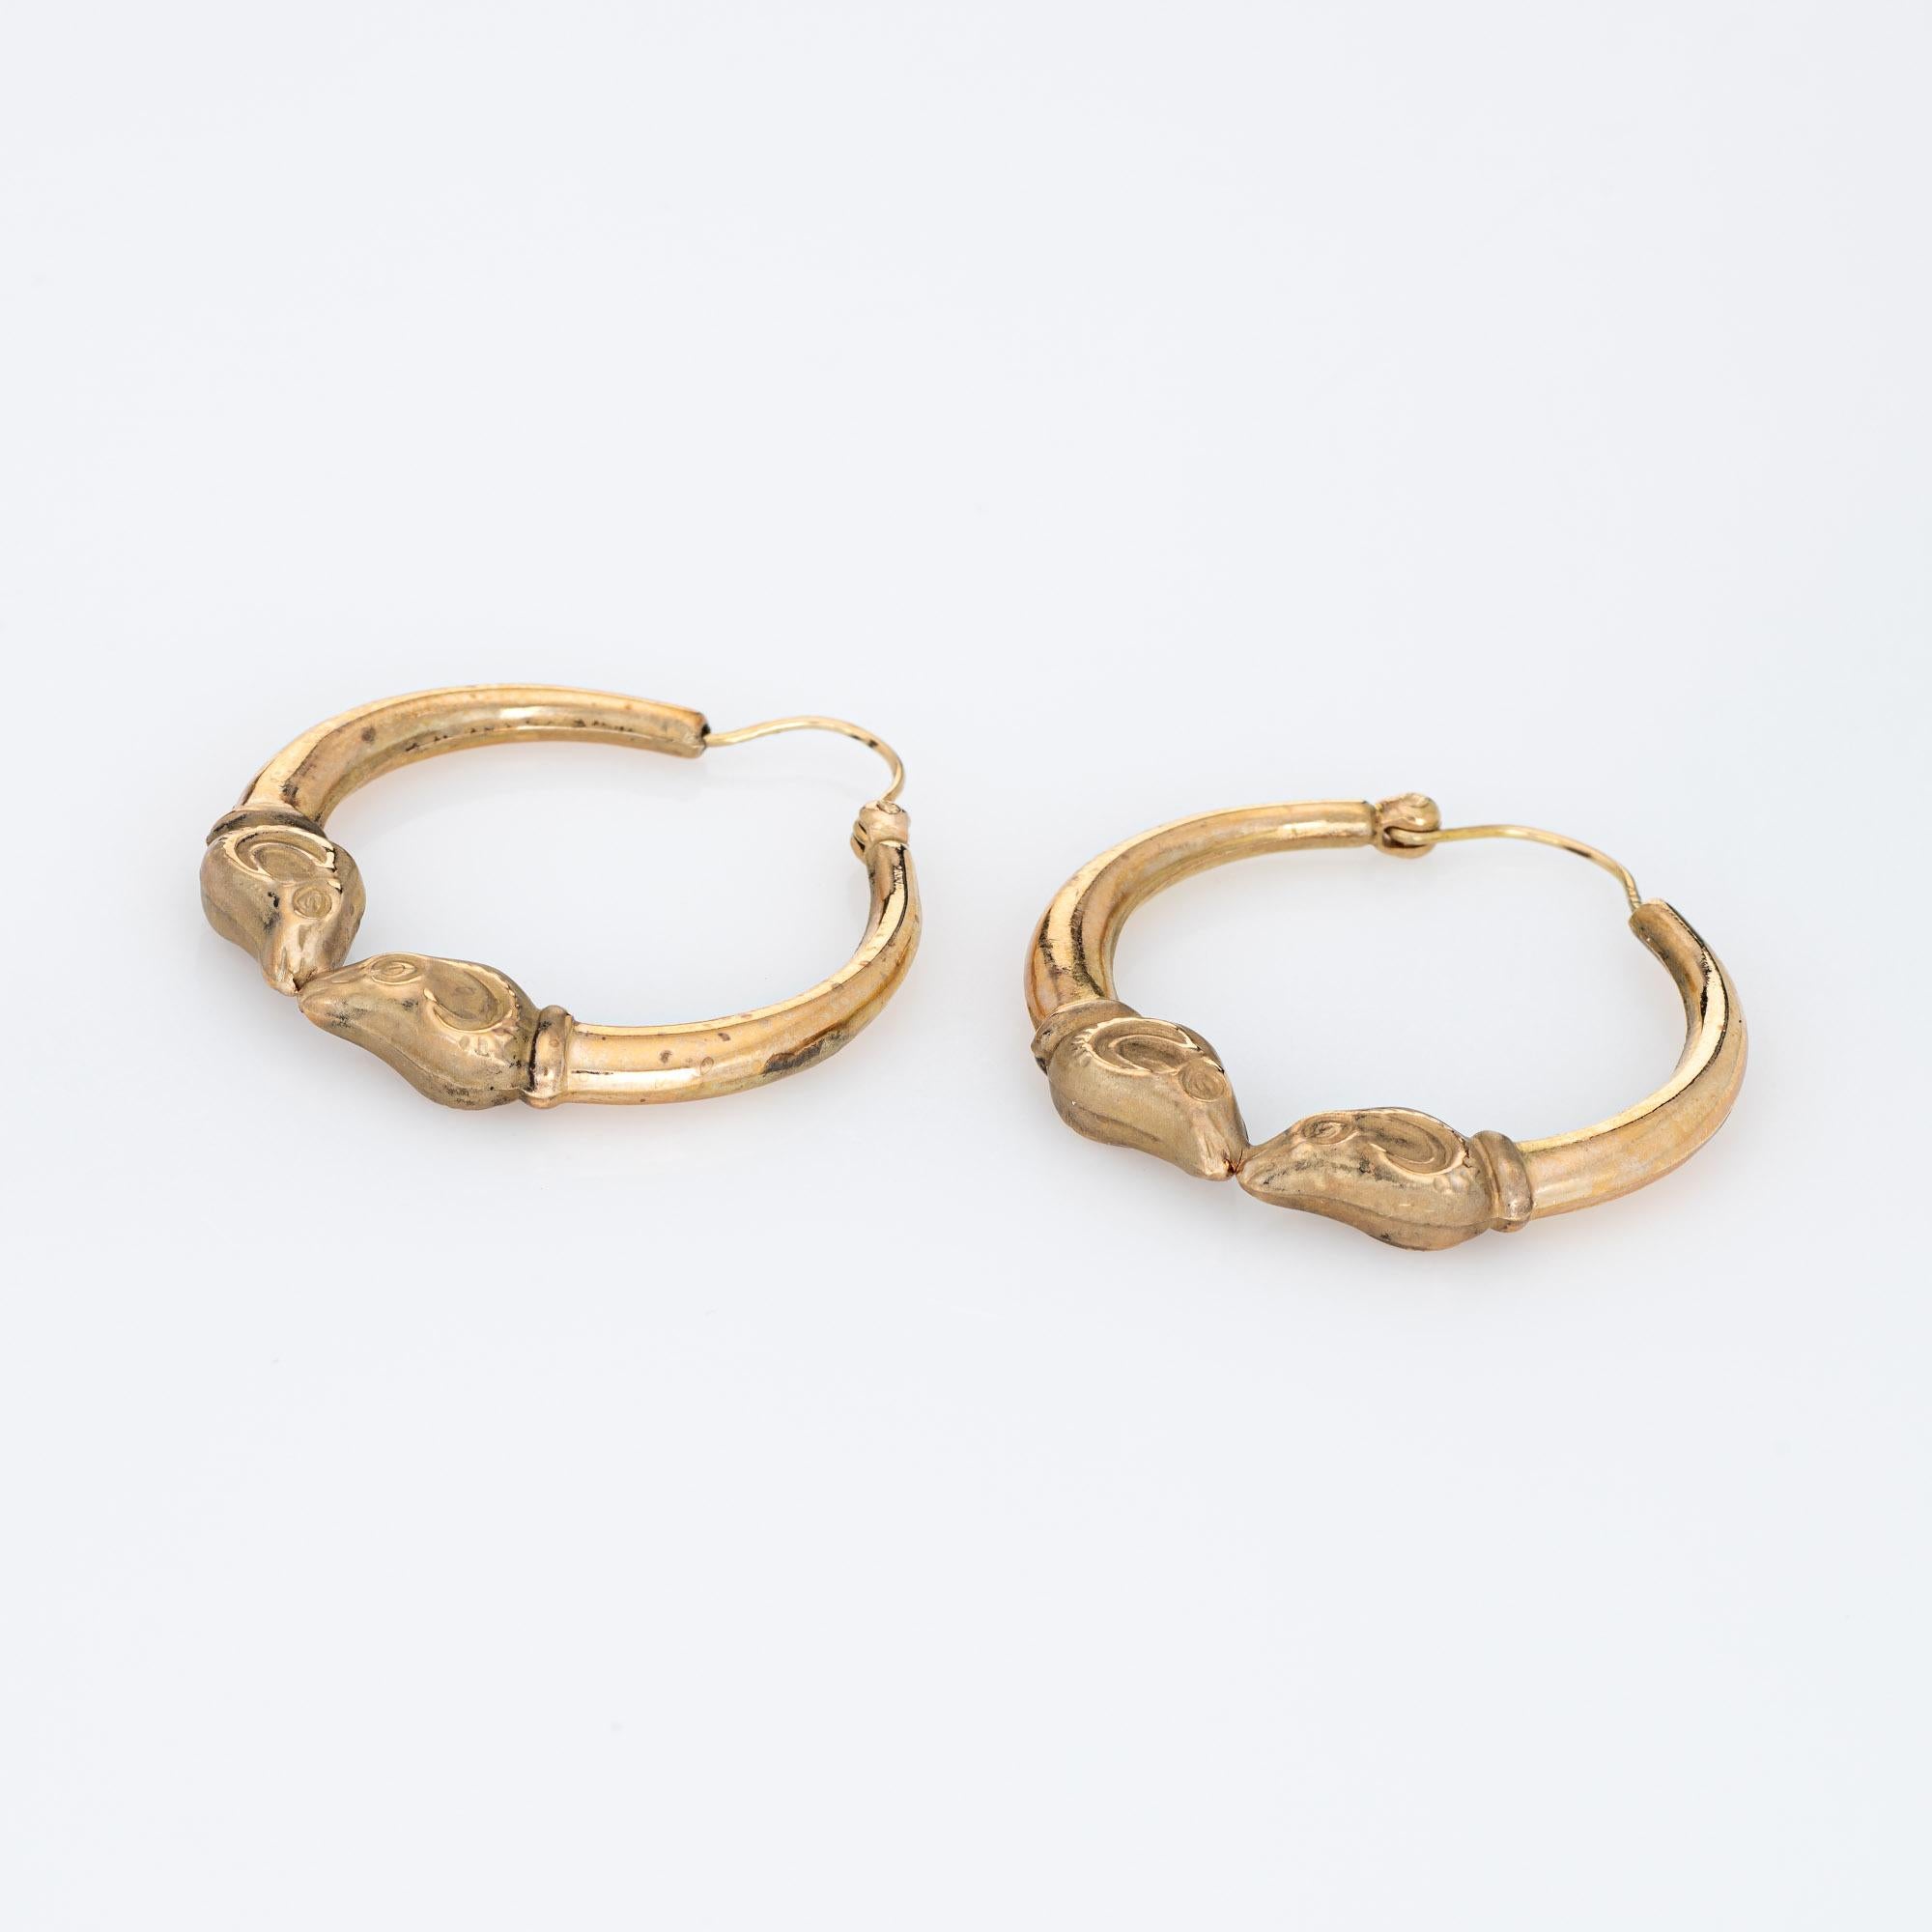 Fine detailed pair of Ram head hoop earrings crafted in 14k yellow gold. 

The stylish earrings feature two satin finished ram's heads to the base of the hoops. The earrings are fitted with wire backings for pierced ears.

The earrings are in very